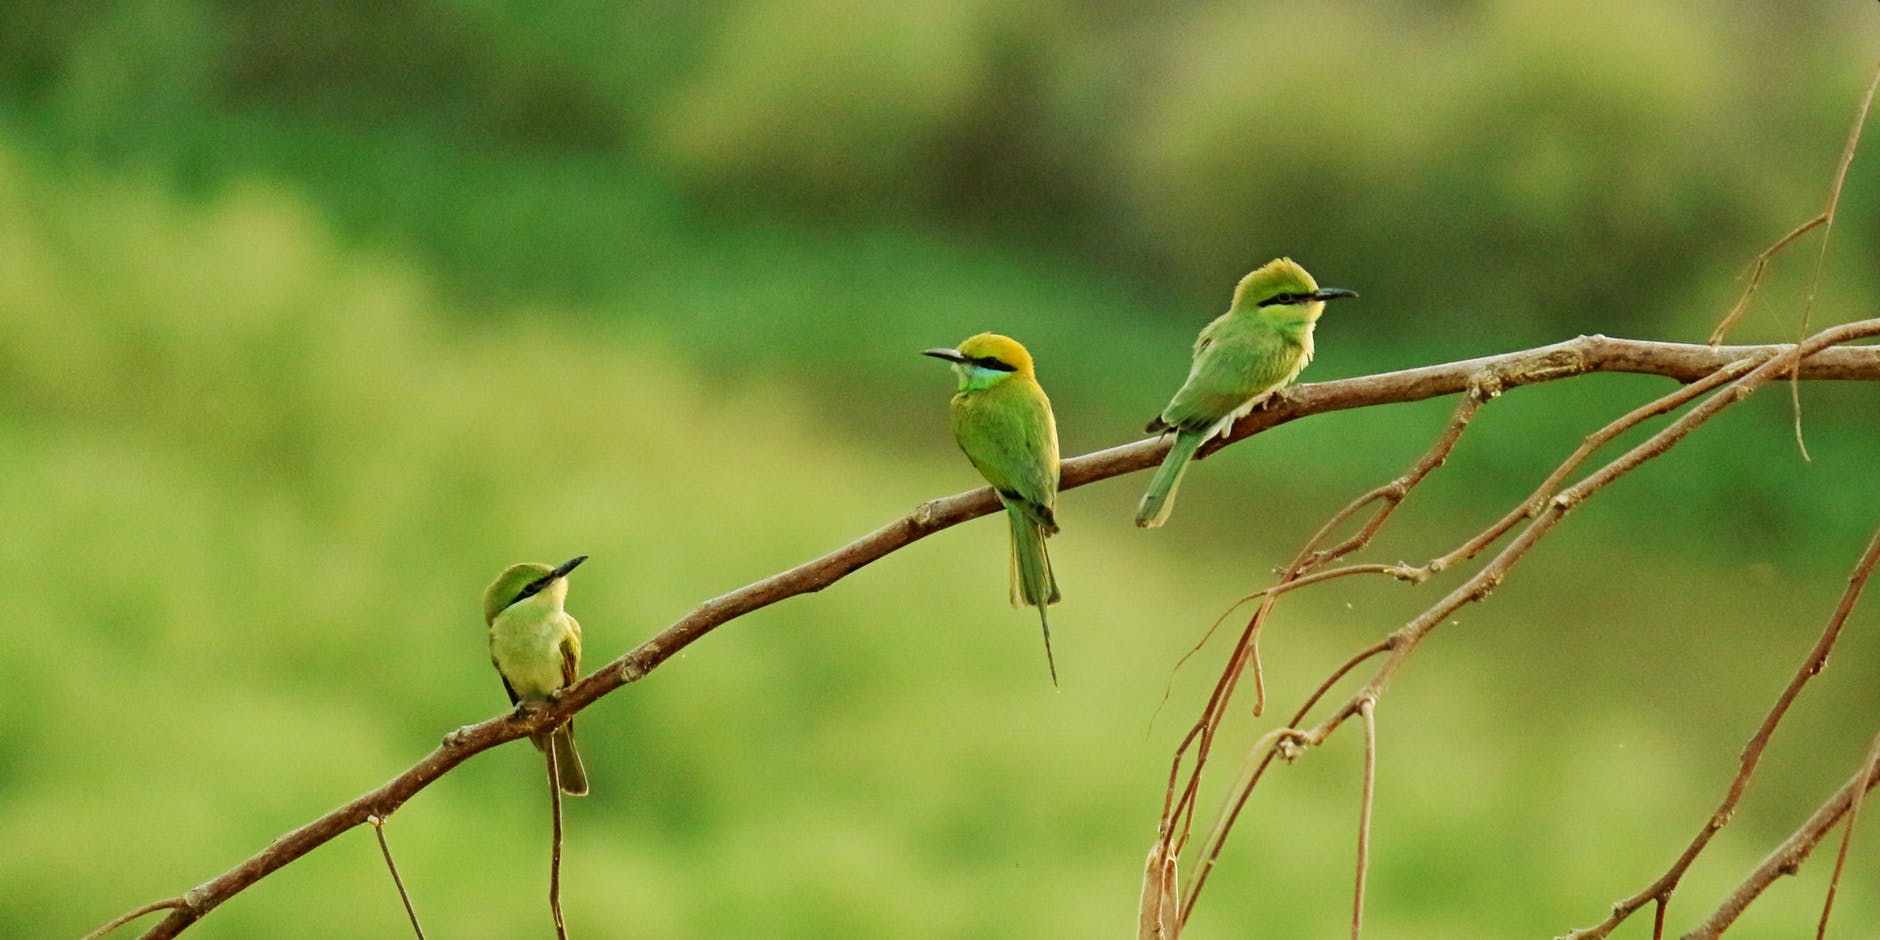 three long beaked small birds perched on brown tree branch